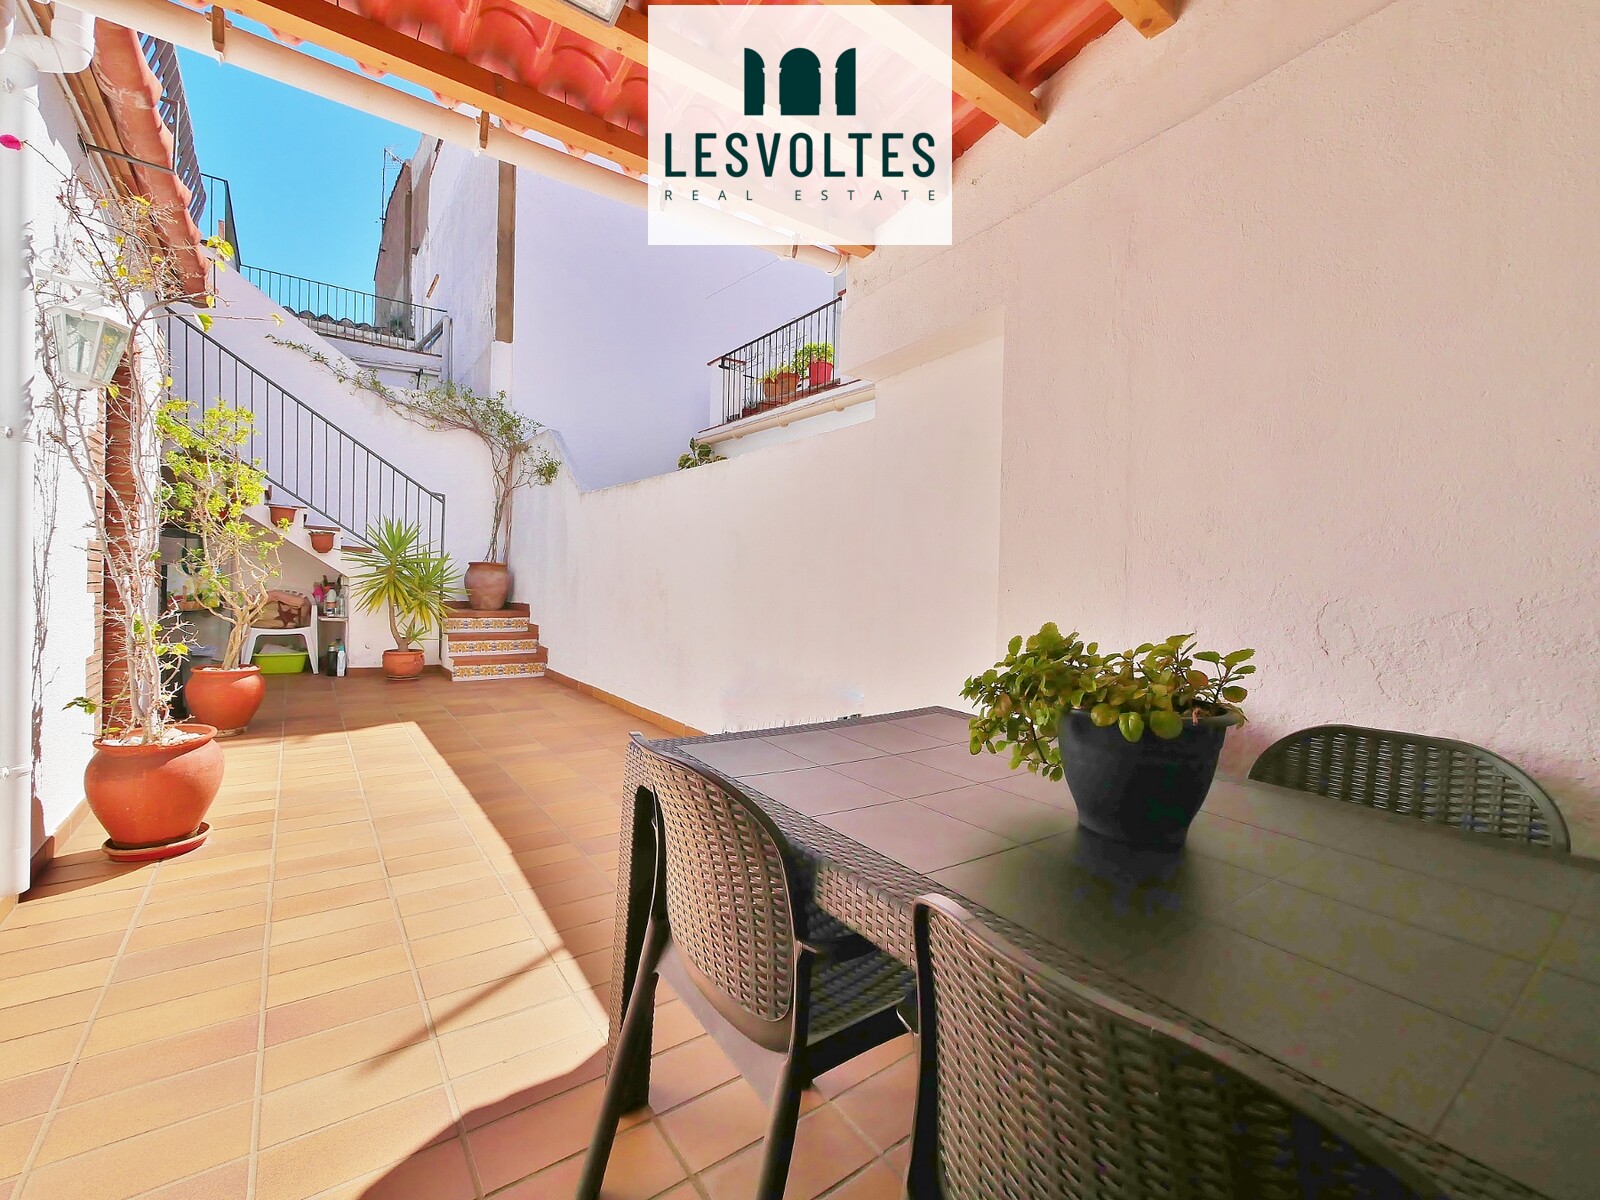 MAGNIFICENT TOWN HOUSE WITH PATIO AND RUSTIC STYLE IN PERFECT CONDITION OF CONSERVATION IN THE CENTER OF PALAFRUGELL